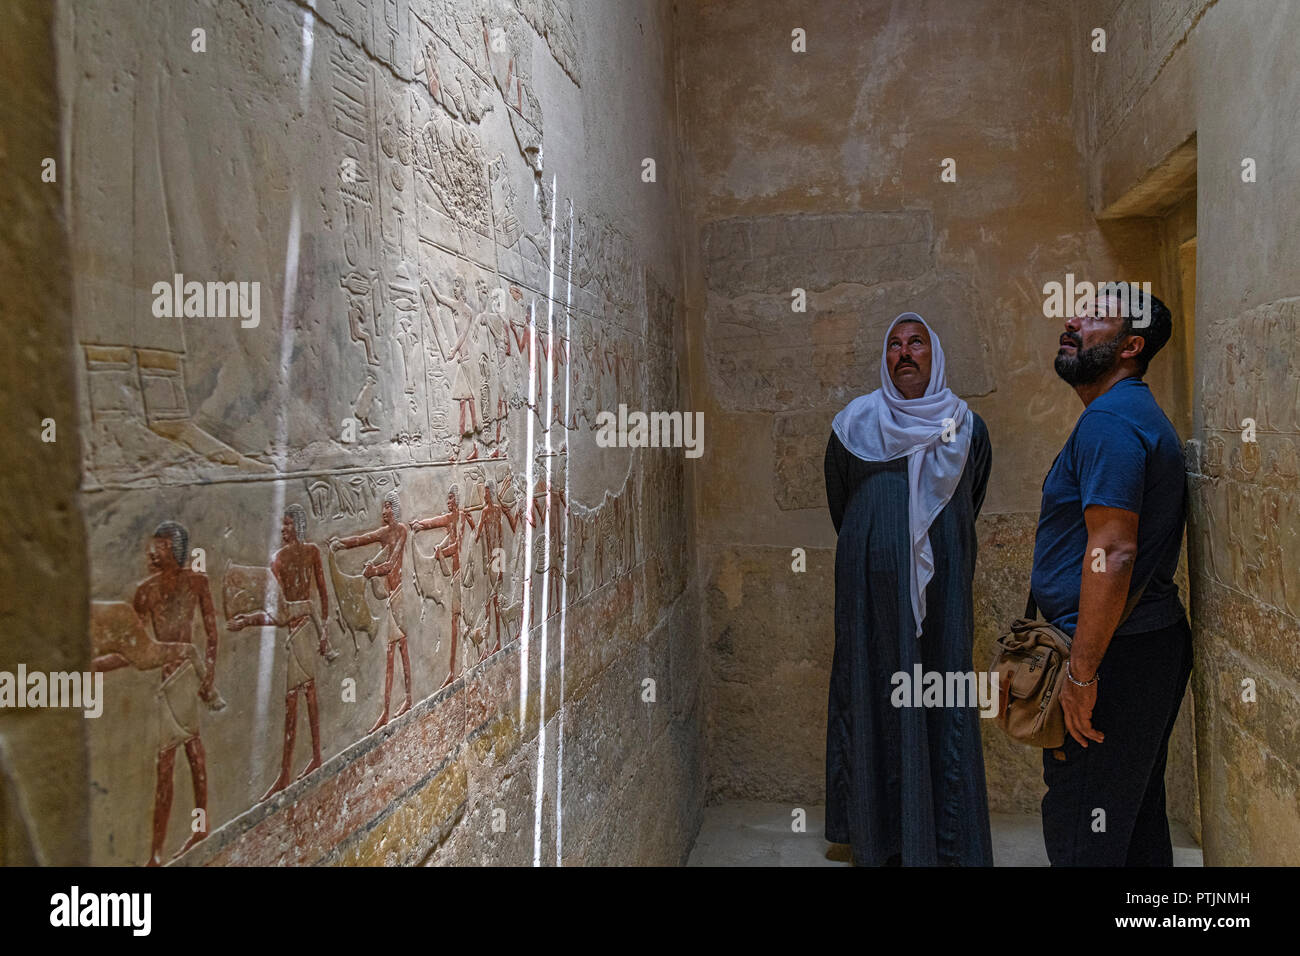 Colorful reliefs on the walls of the Mereruka  and Kagemni tombs north of the Teti Pyramid,at the Saqqara necropolis for the Ancient Egyptian capital Stock Photo